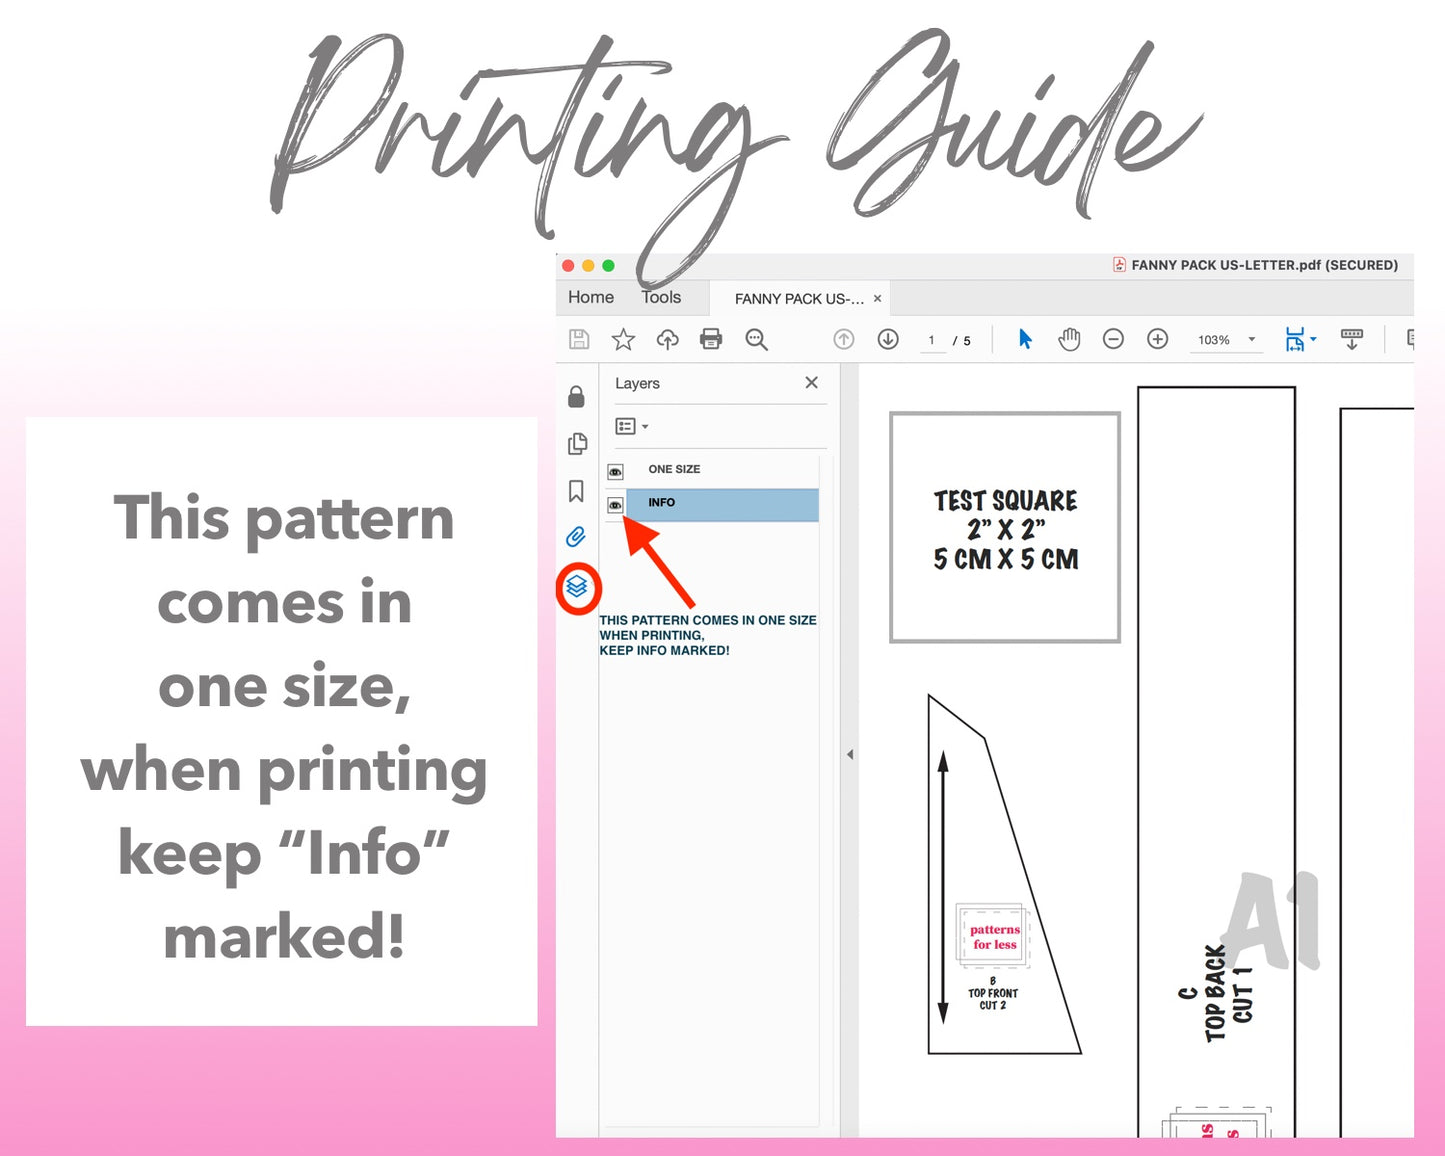 Fanny Pack sewing pattern printing guide.